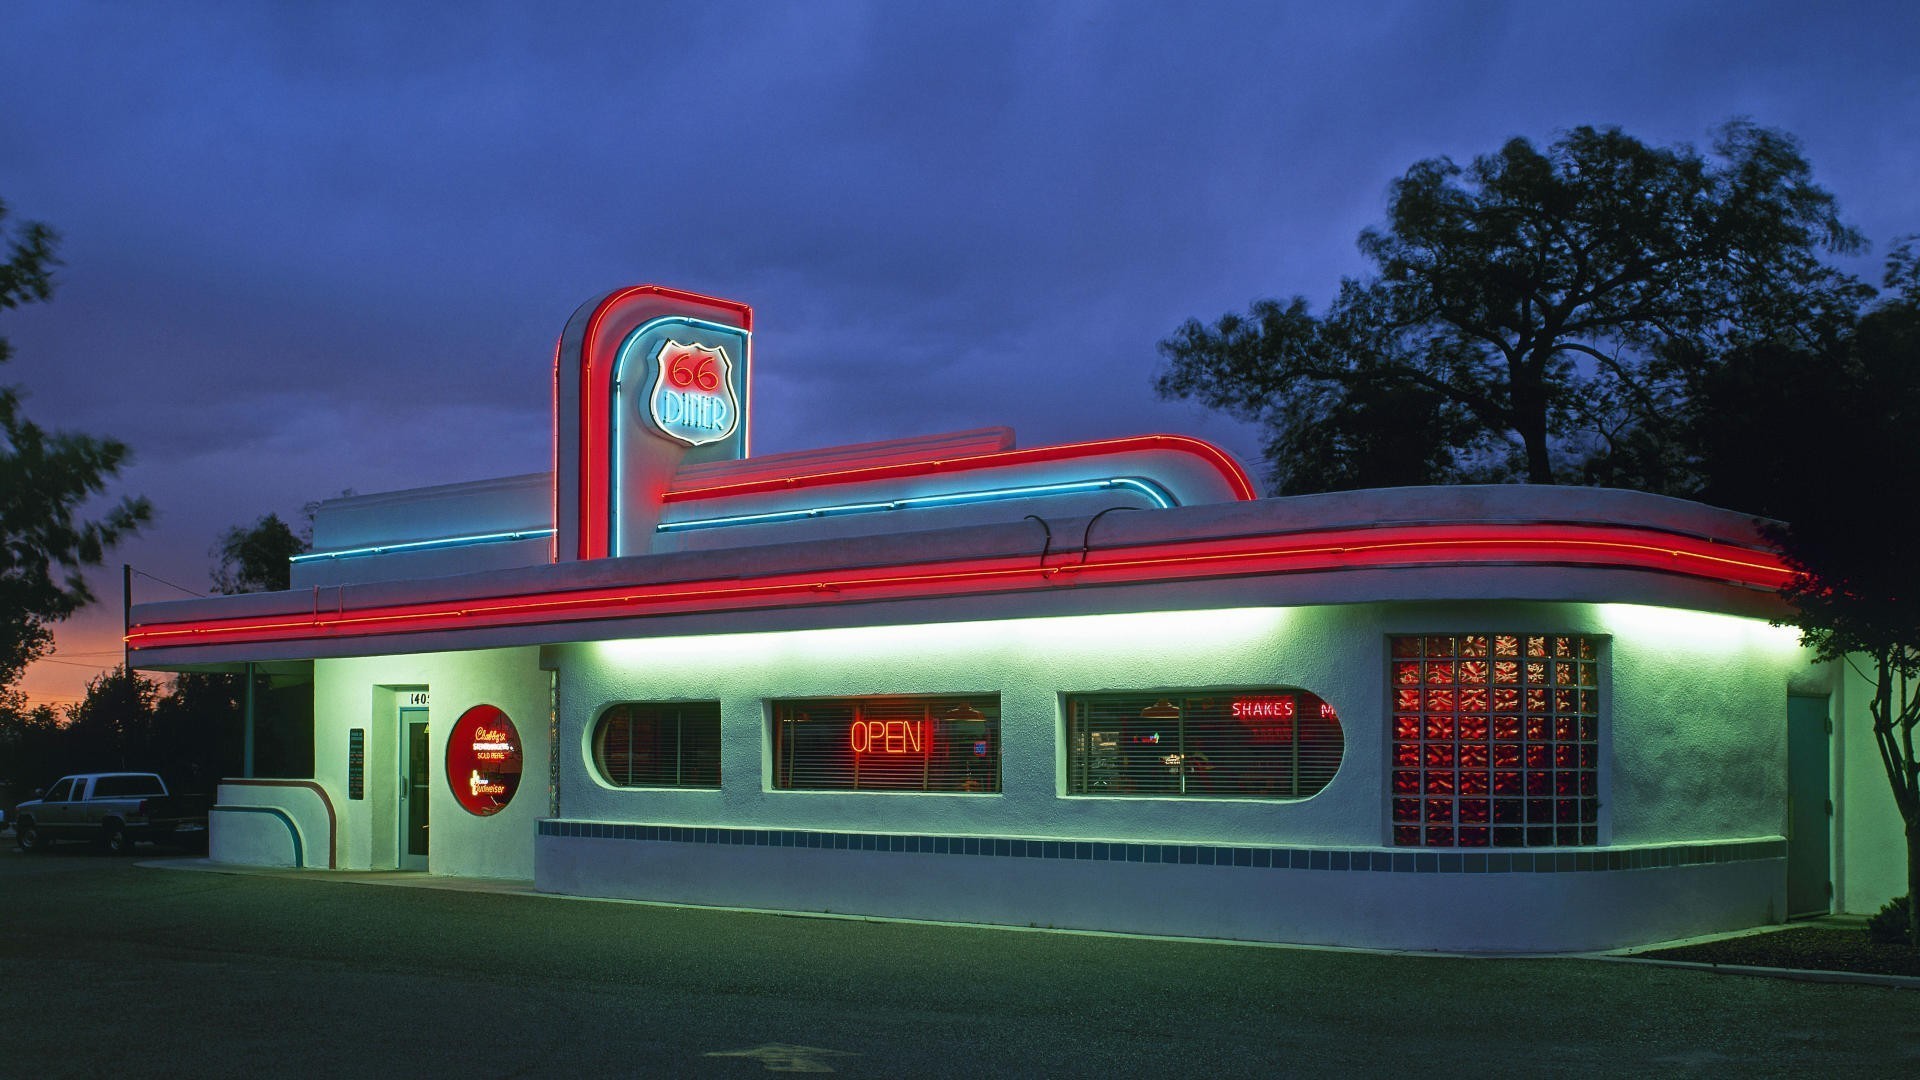 Diner On Route 66 In California Wallpaper 1920x1080